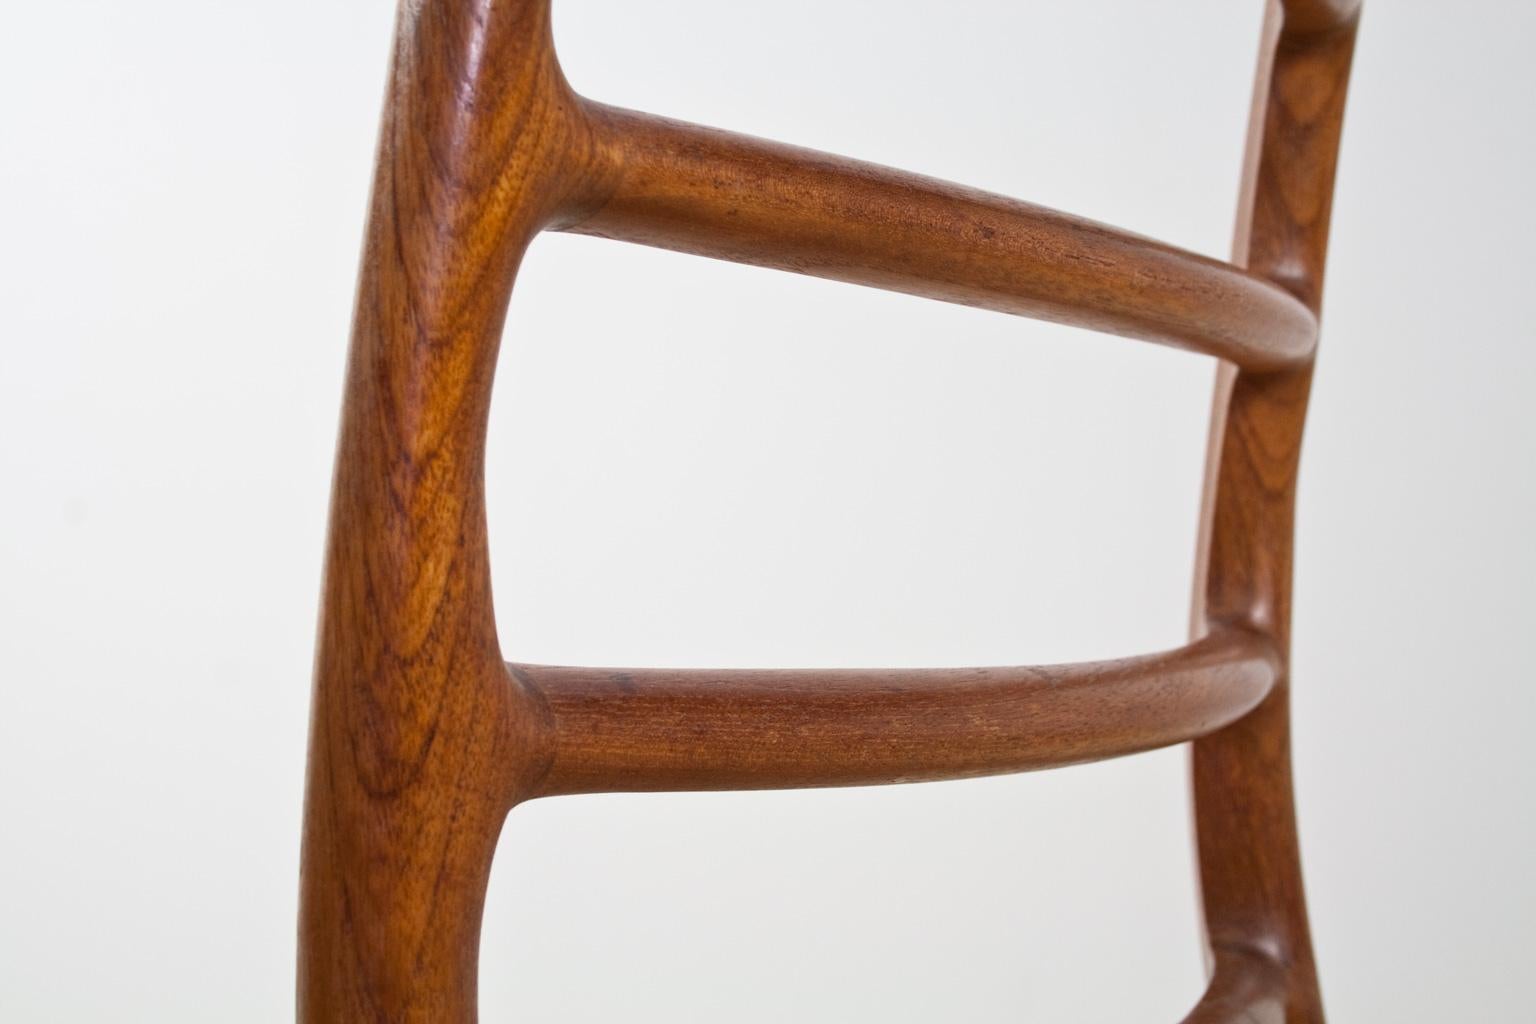 Scandinavian Modern Dining Chair in Teak and Paper Cord by Niels Moller, 1954 For Sale 2